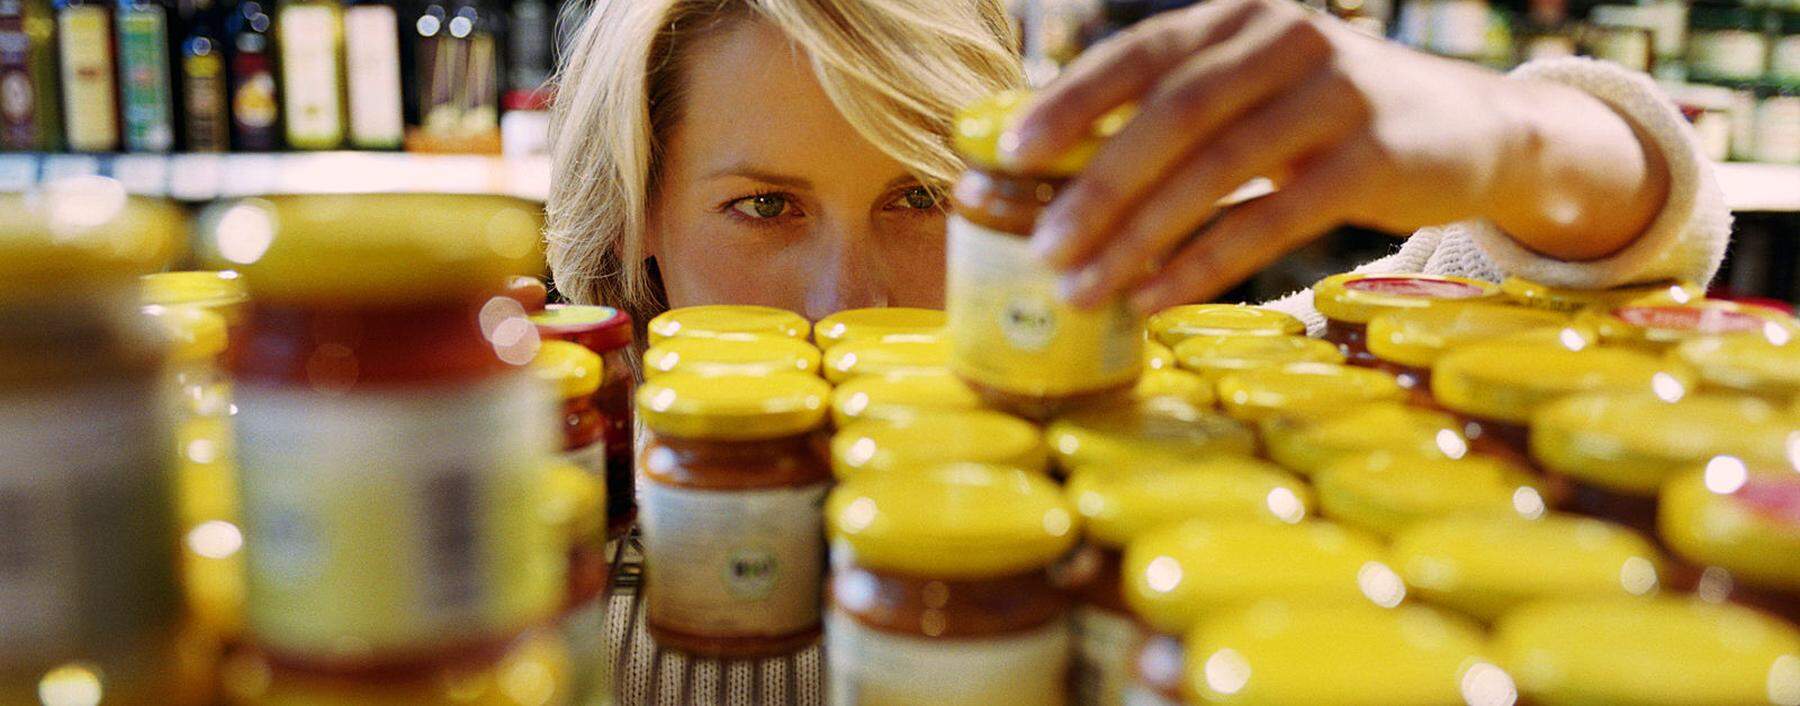 Young woman selecting jar from shelf in shop (focus on woman´s face)